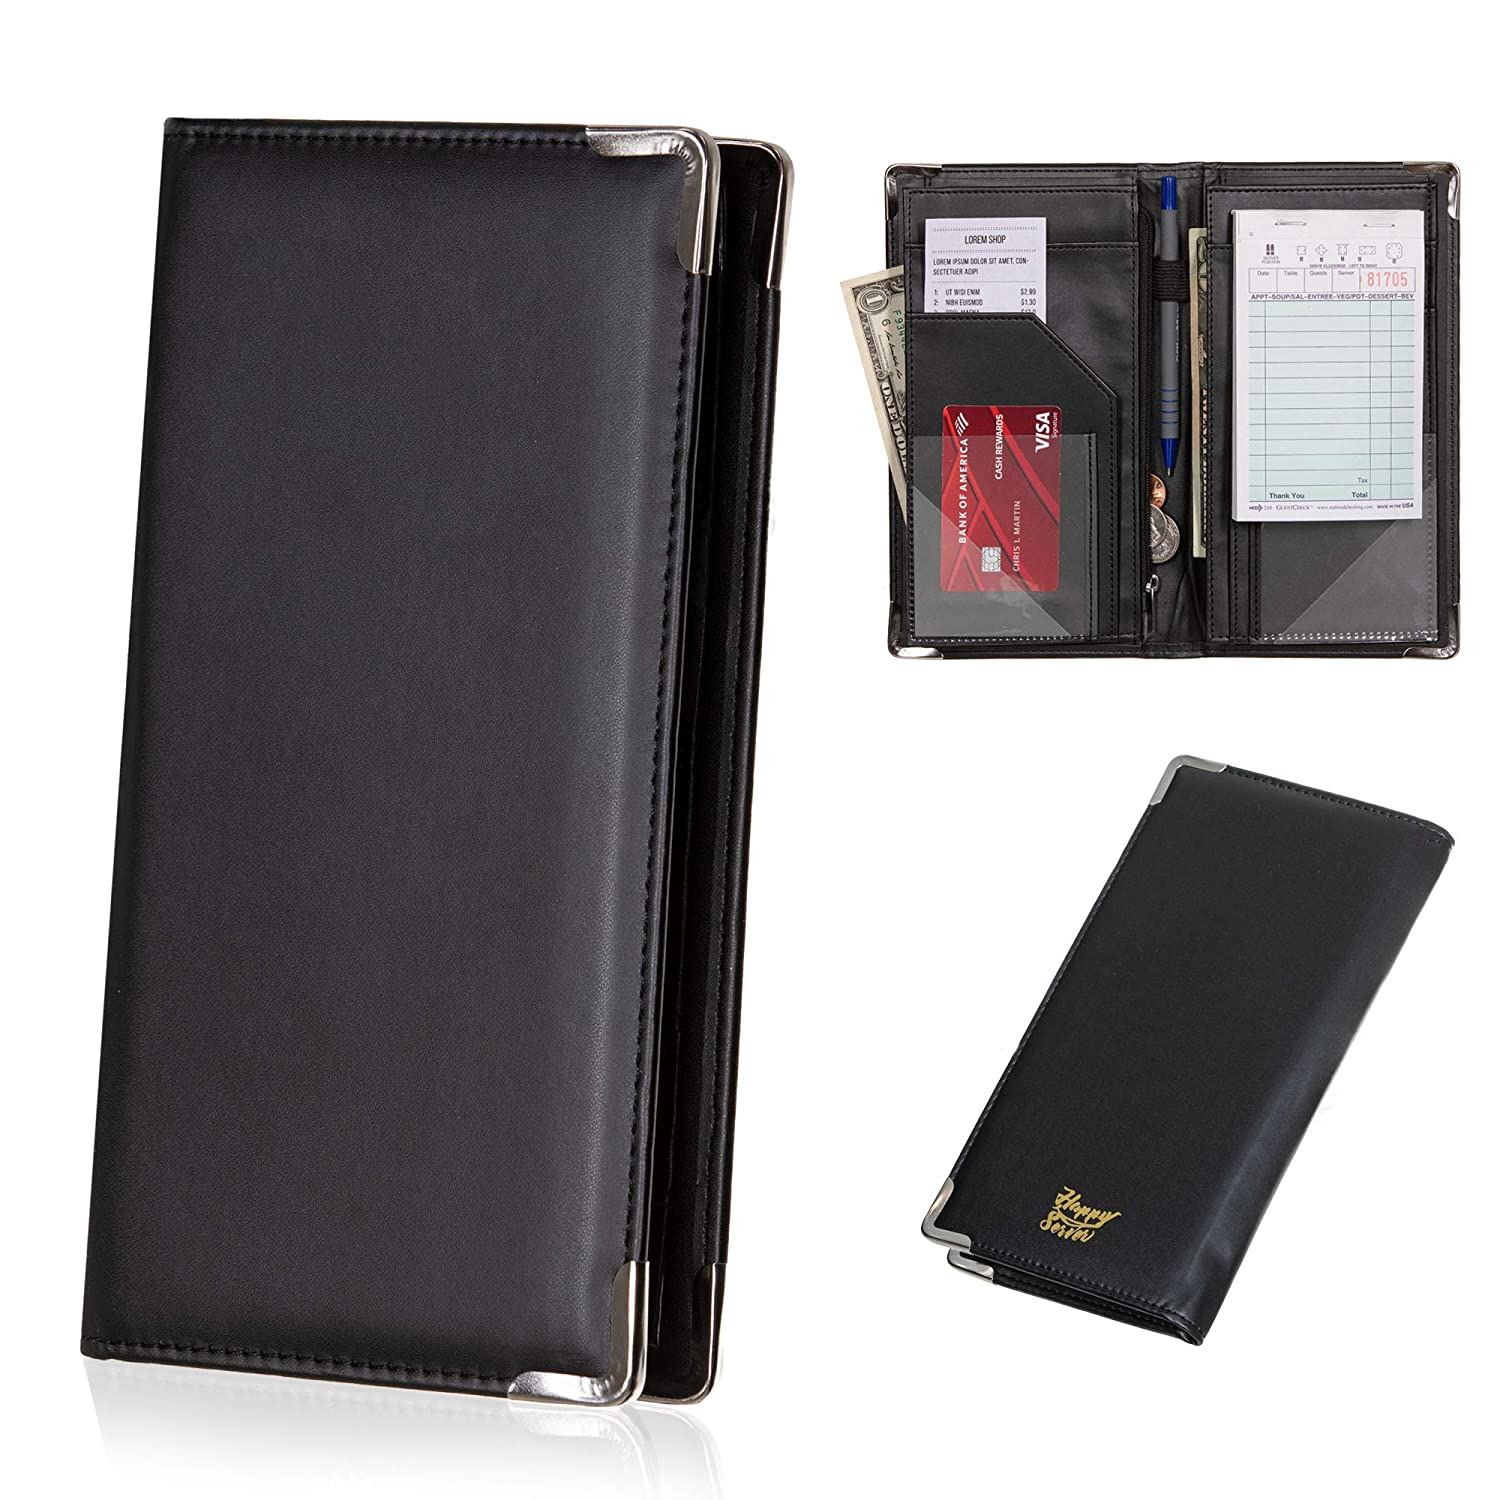 Waitress Waiter Book and Server Wallet with 11 Pockets and Pen Holder Keep Guest